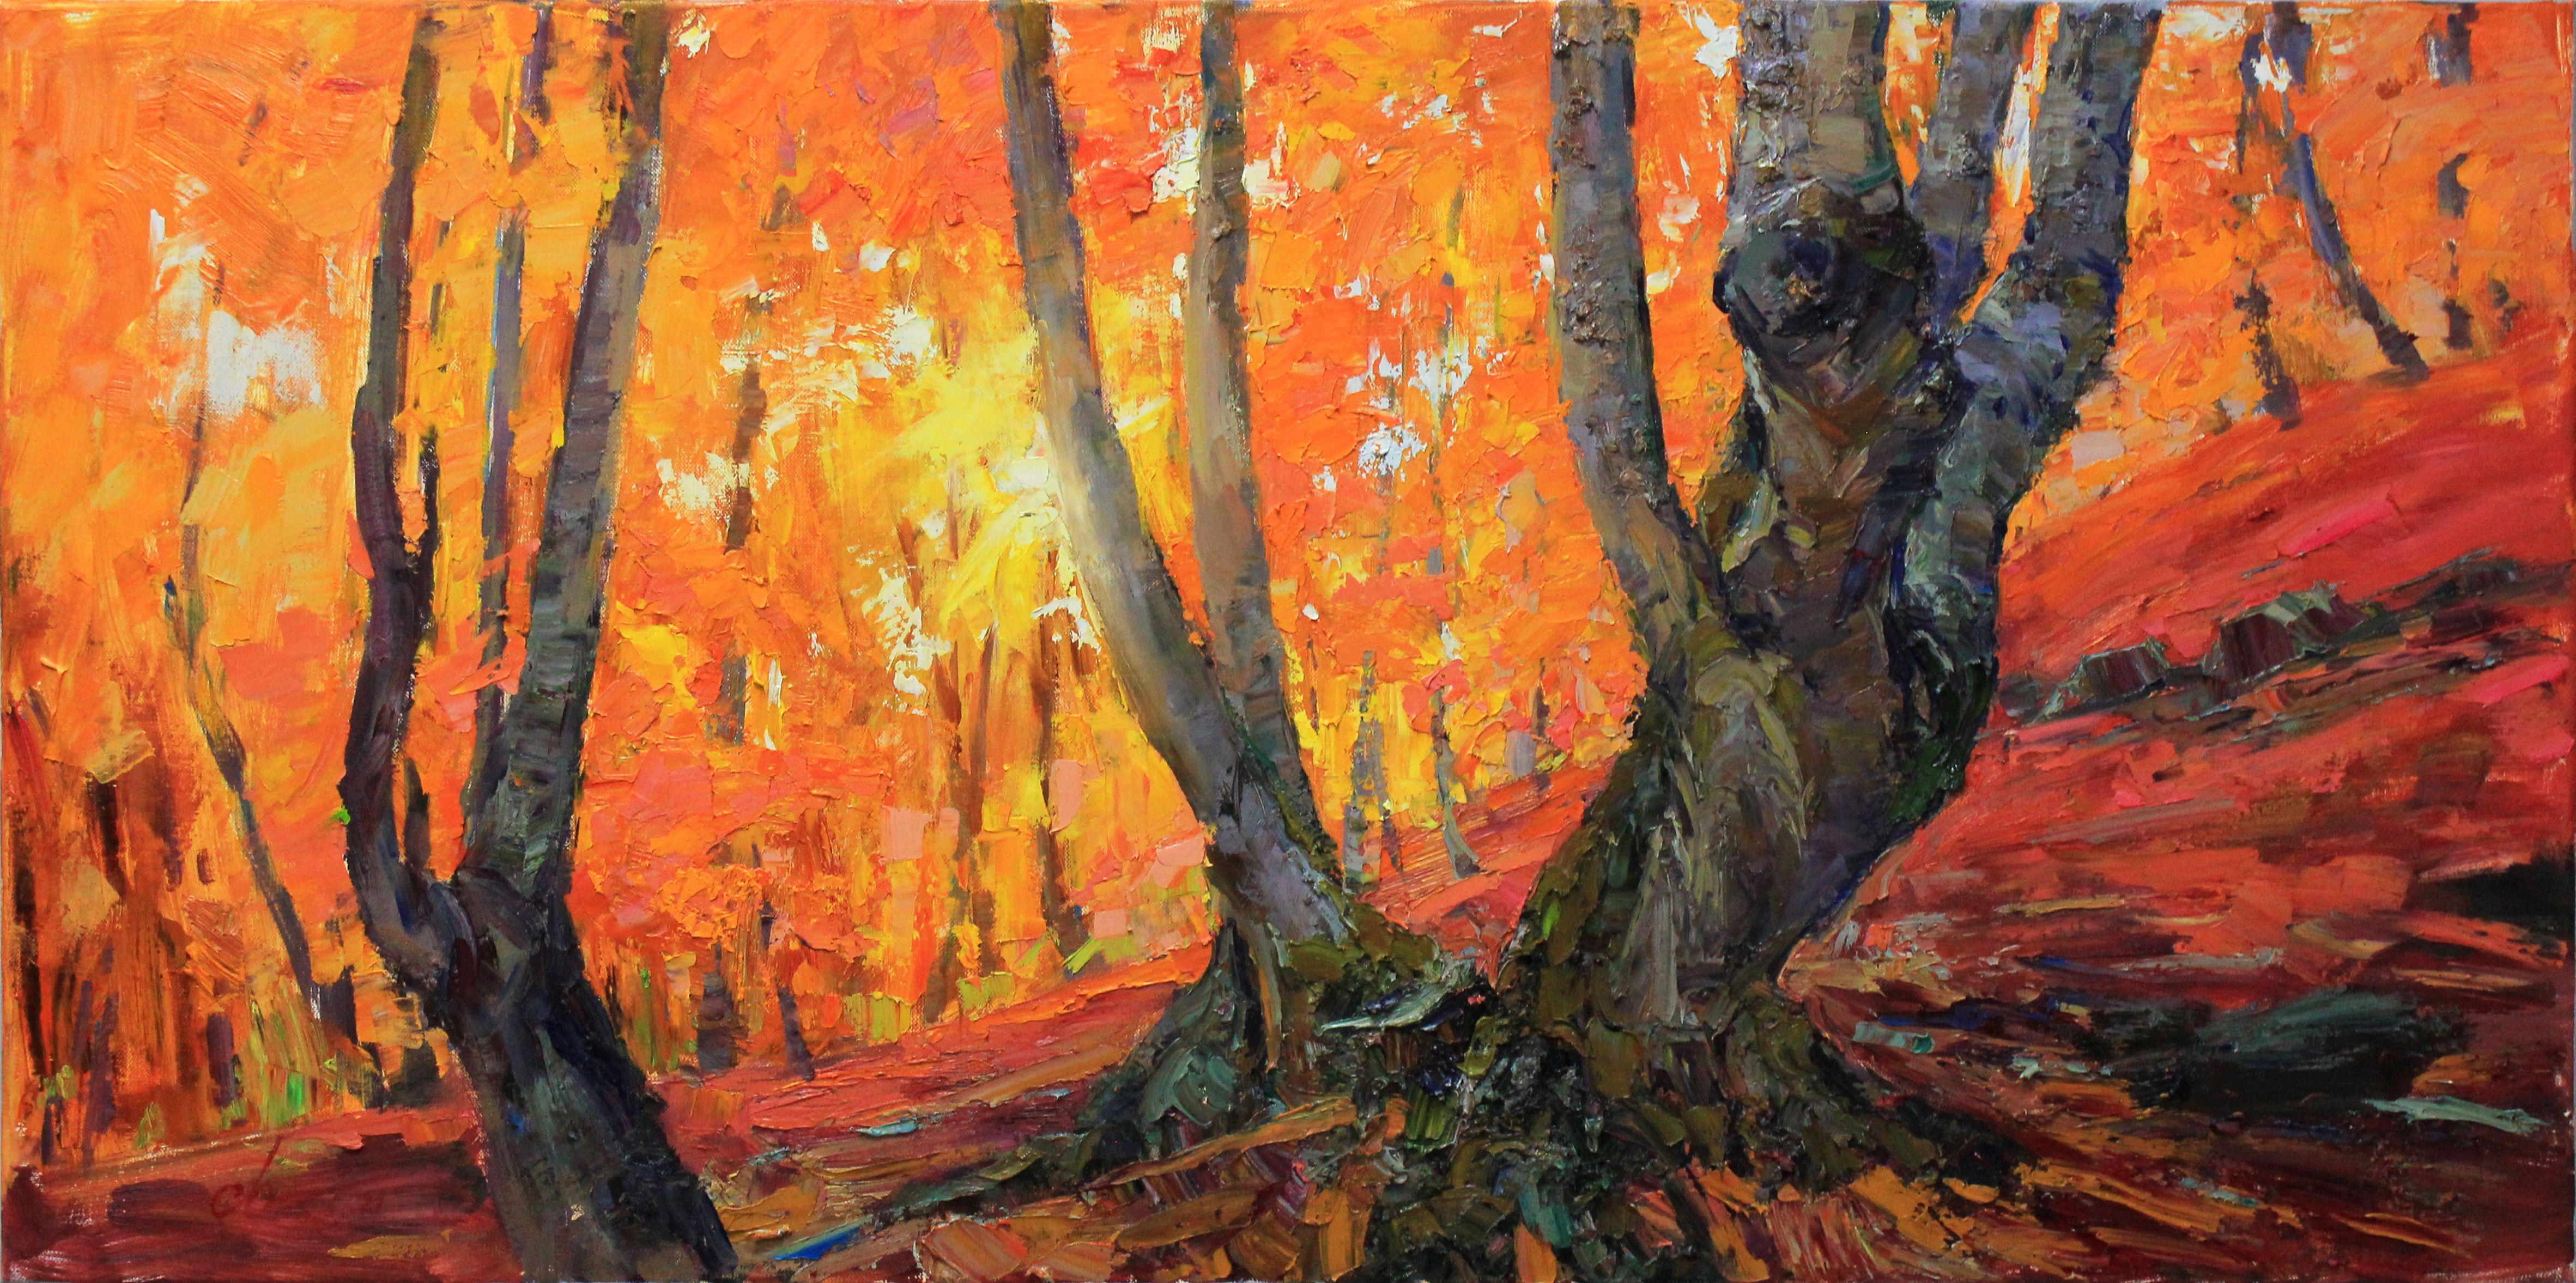 The beauty of the forest inspired me to create the painting "Autumn Forest".  The forest landscape is painted in warm yellows, oranges, browns, reds and blues.  The picture is written in the style of art impressionism art, art expressionism.  The